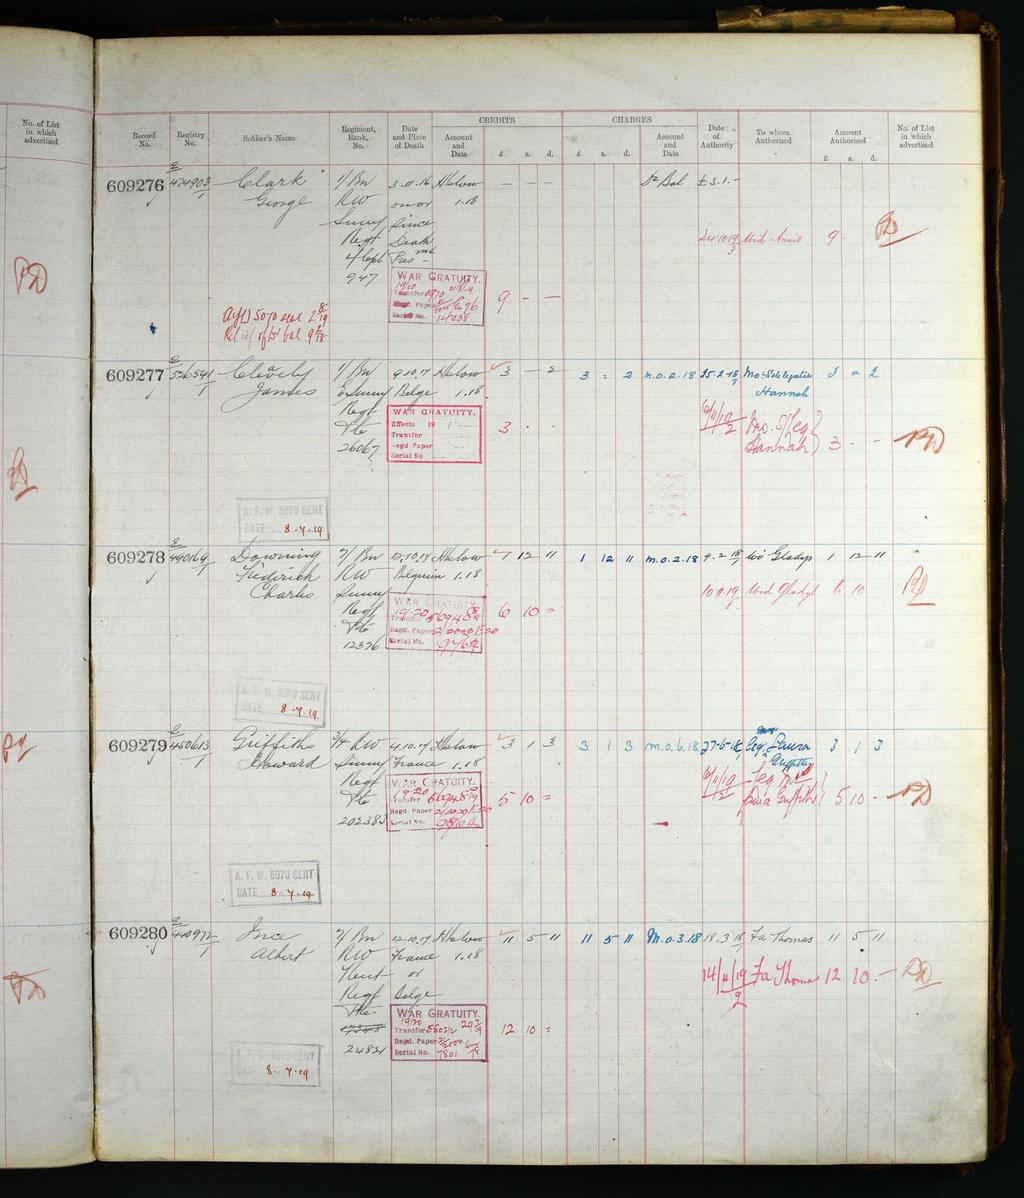 Above: Register of Soldiers Effects, showing